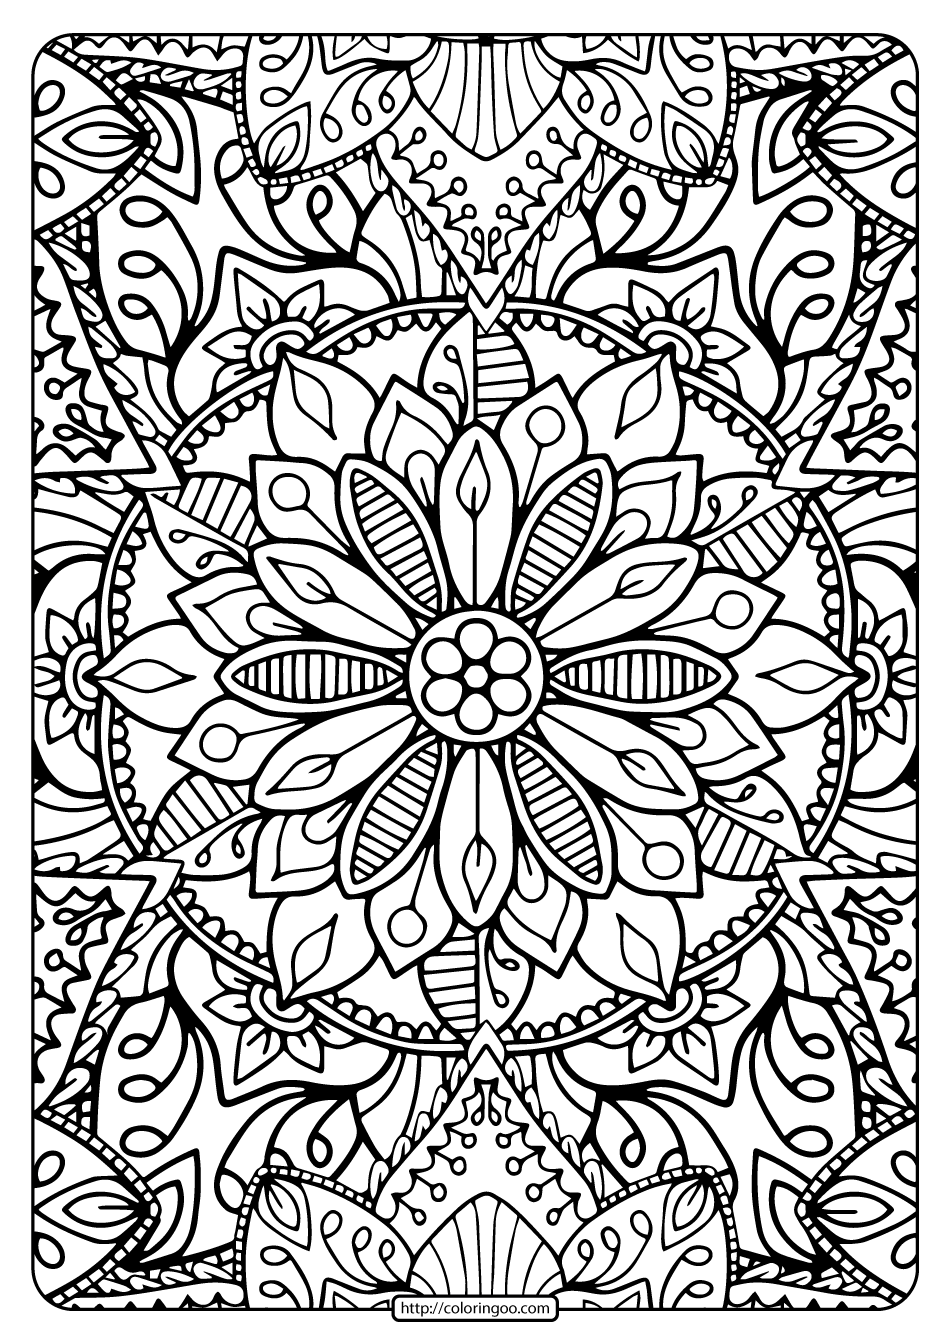 Printable coloring book pages for adults pattern coloring pages adult coloring books printables printable coloring book